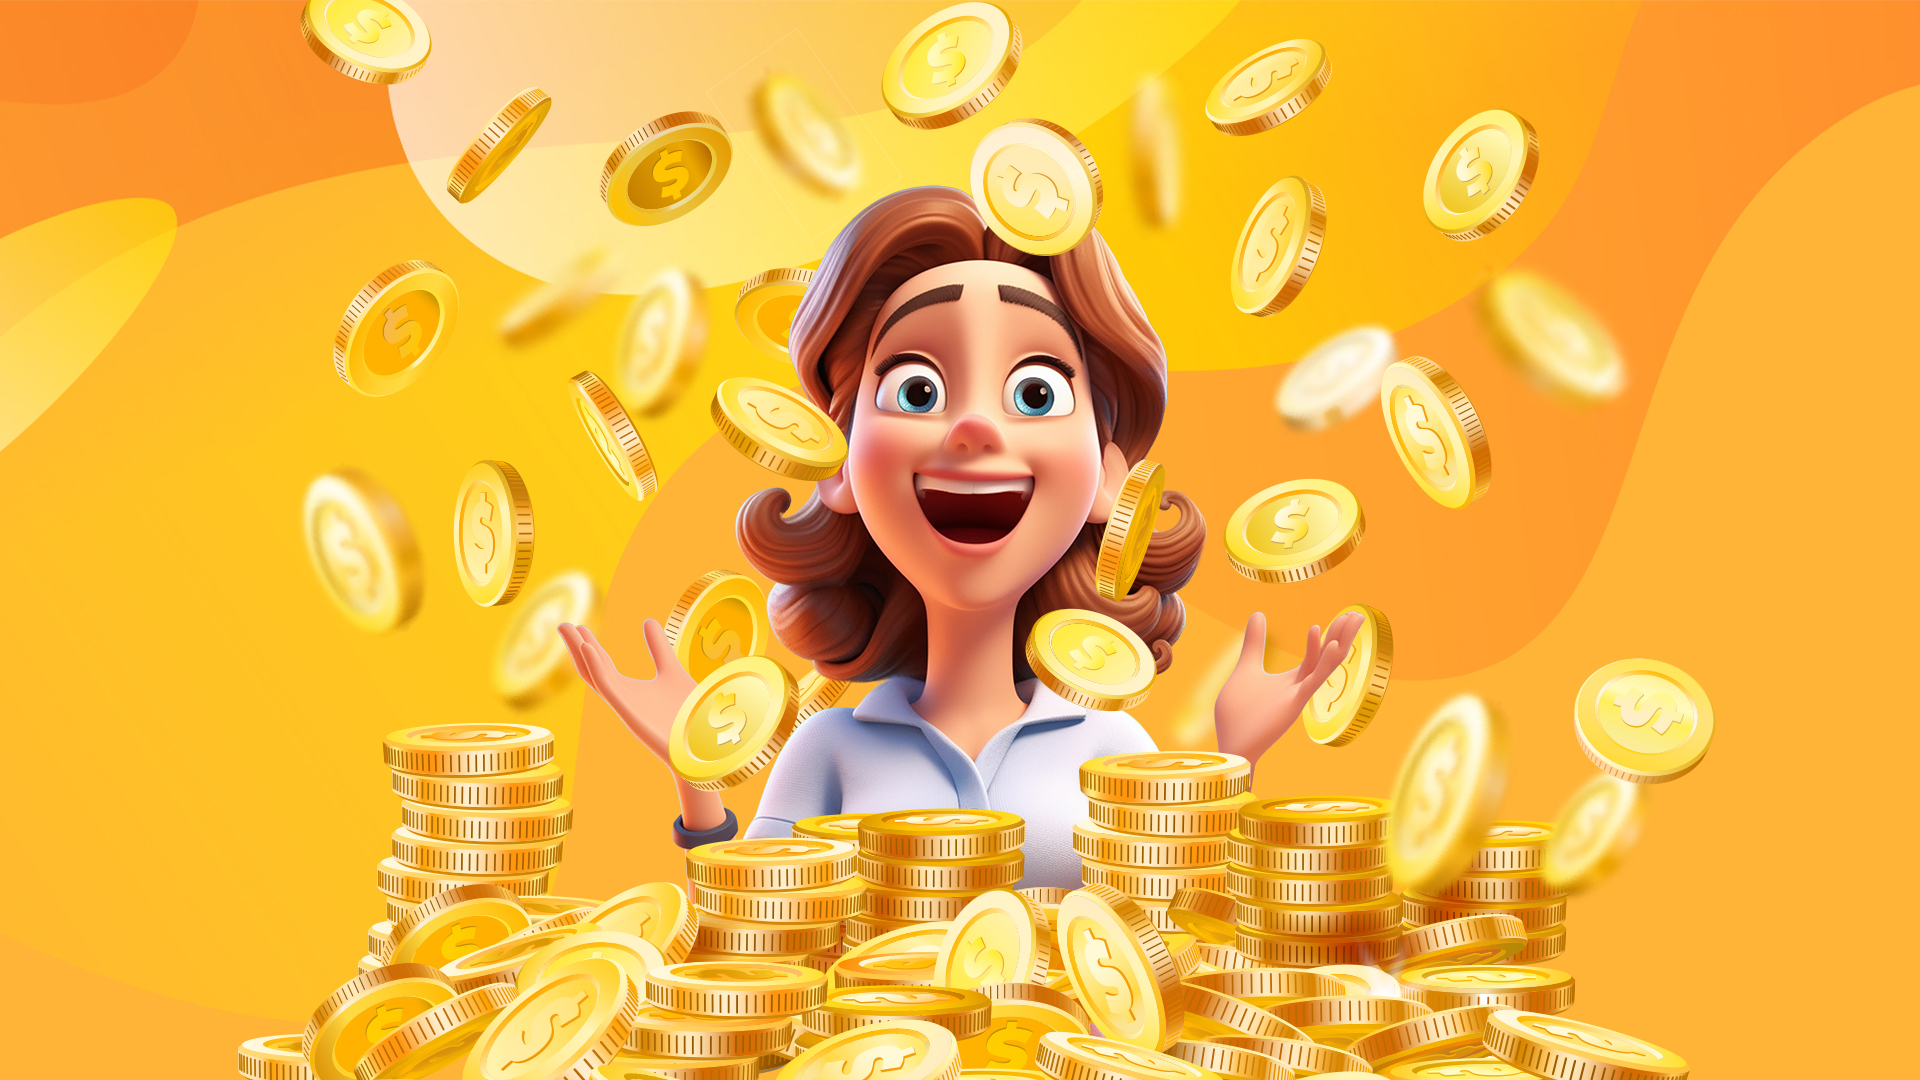 Cartoon woman emerges from a mountain of gold coins against a yellow-orange background.